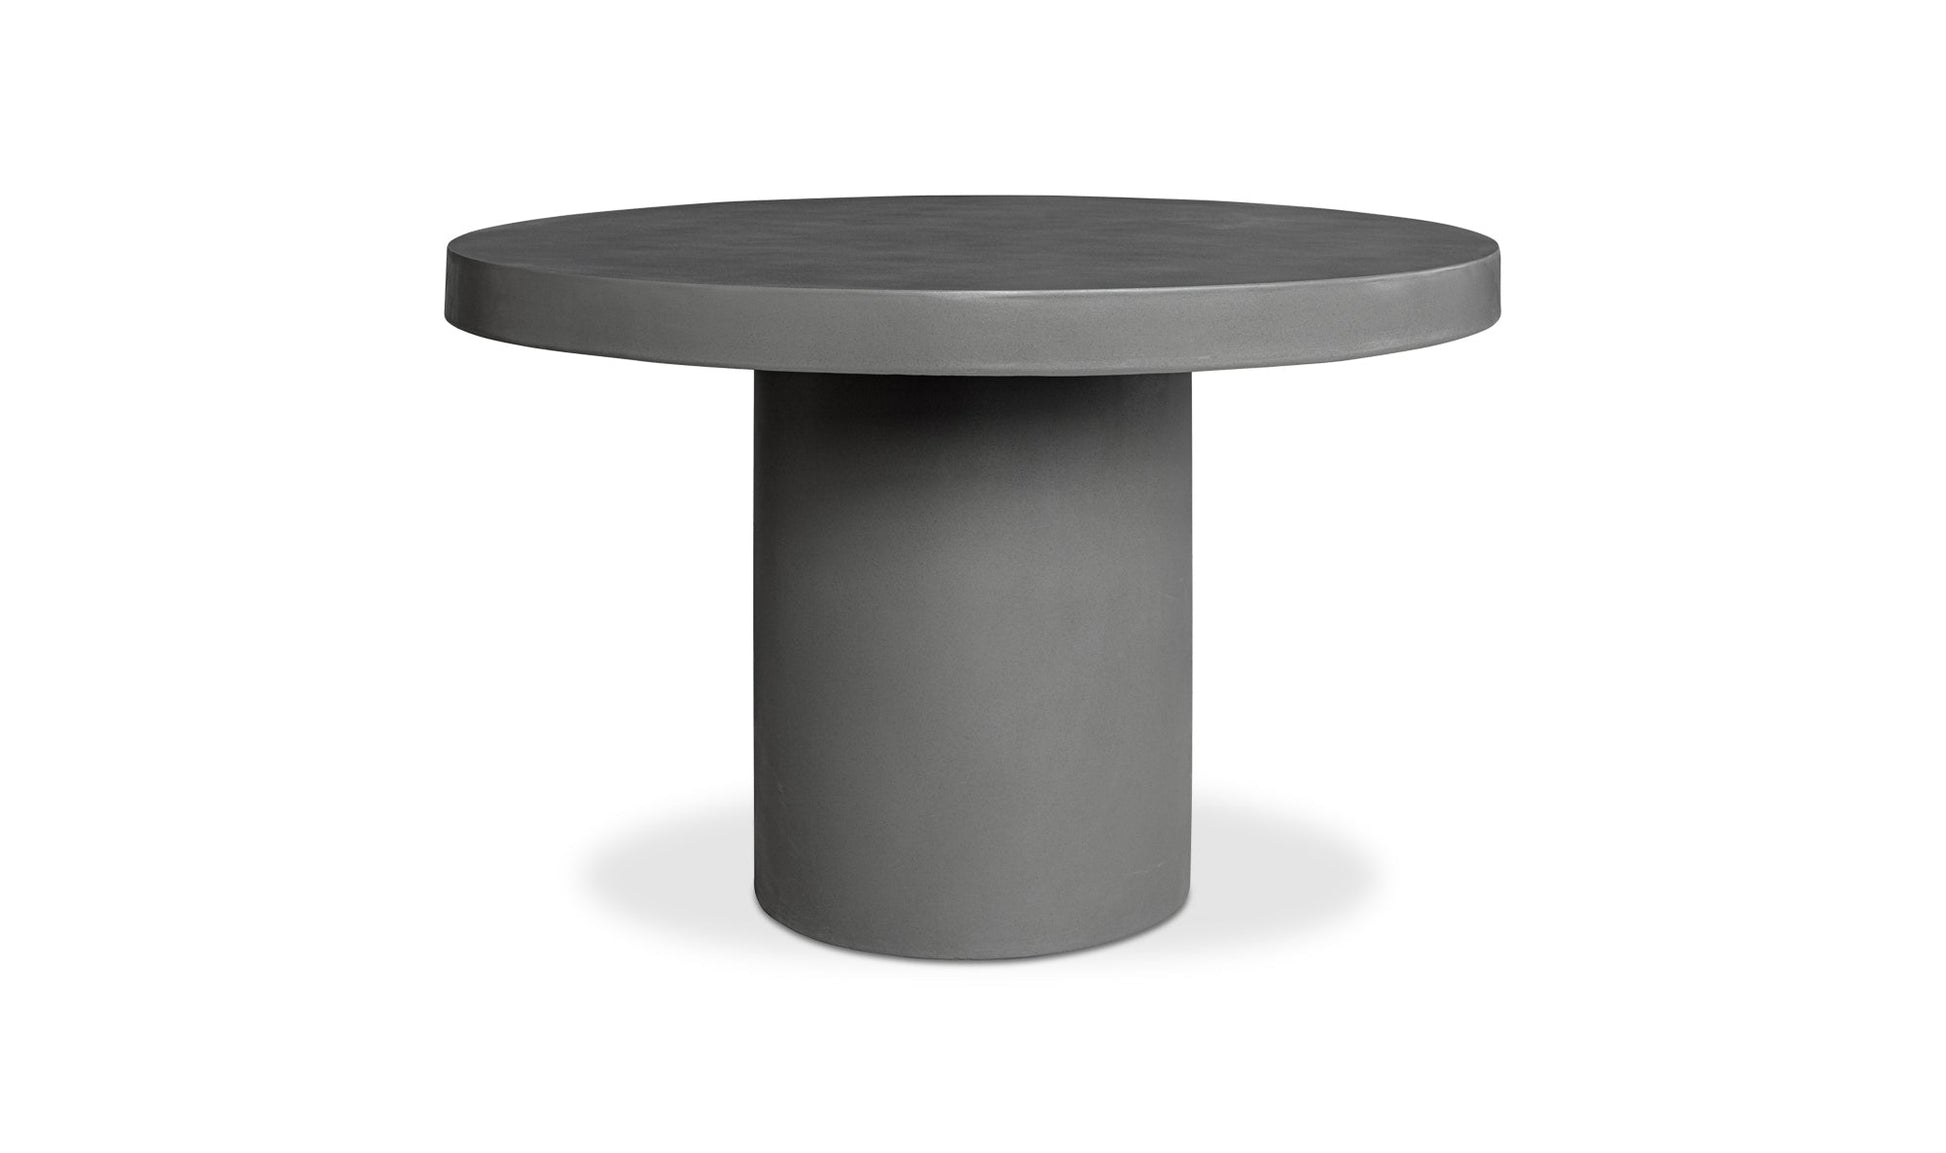 Moe's CASSIUS ROUND OUTDOOR DINING TABLE